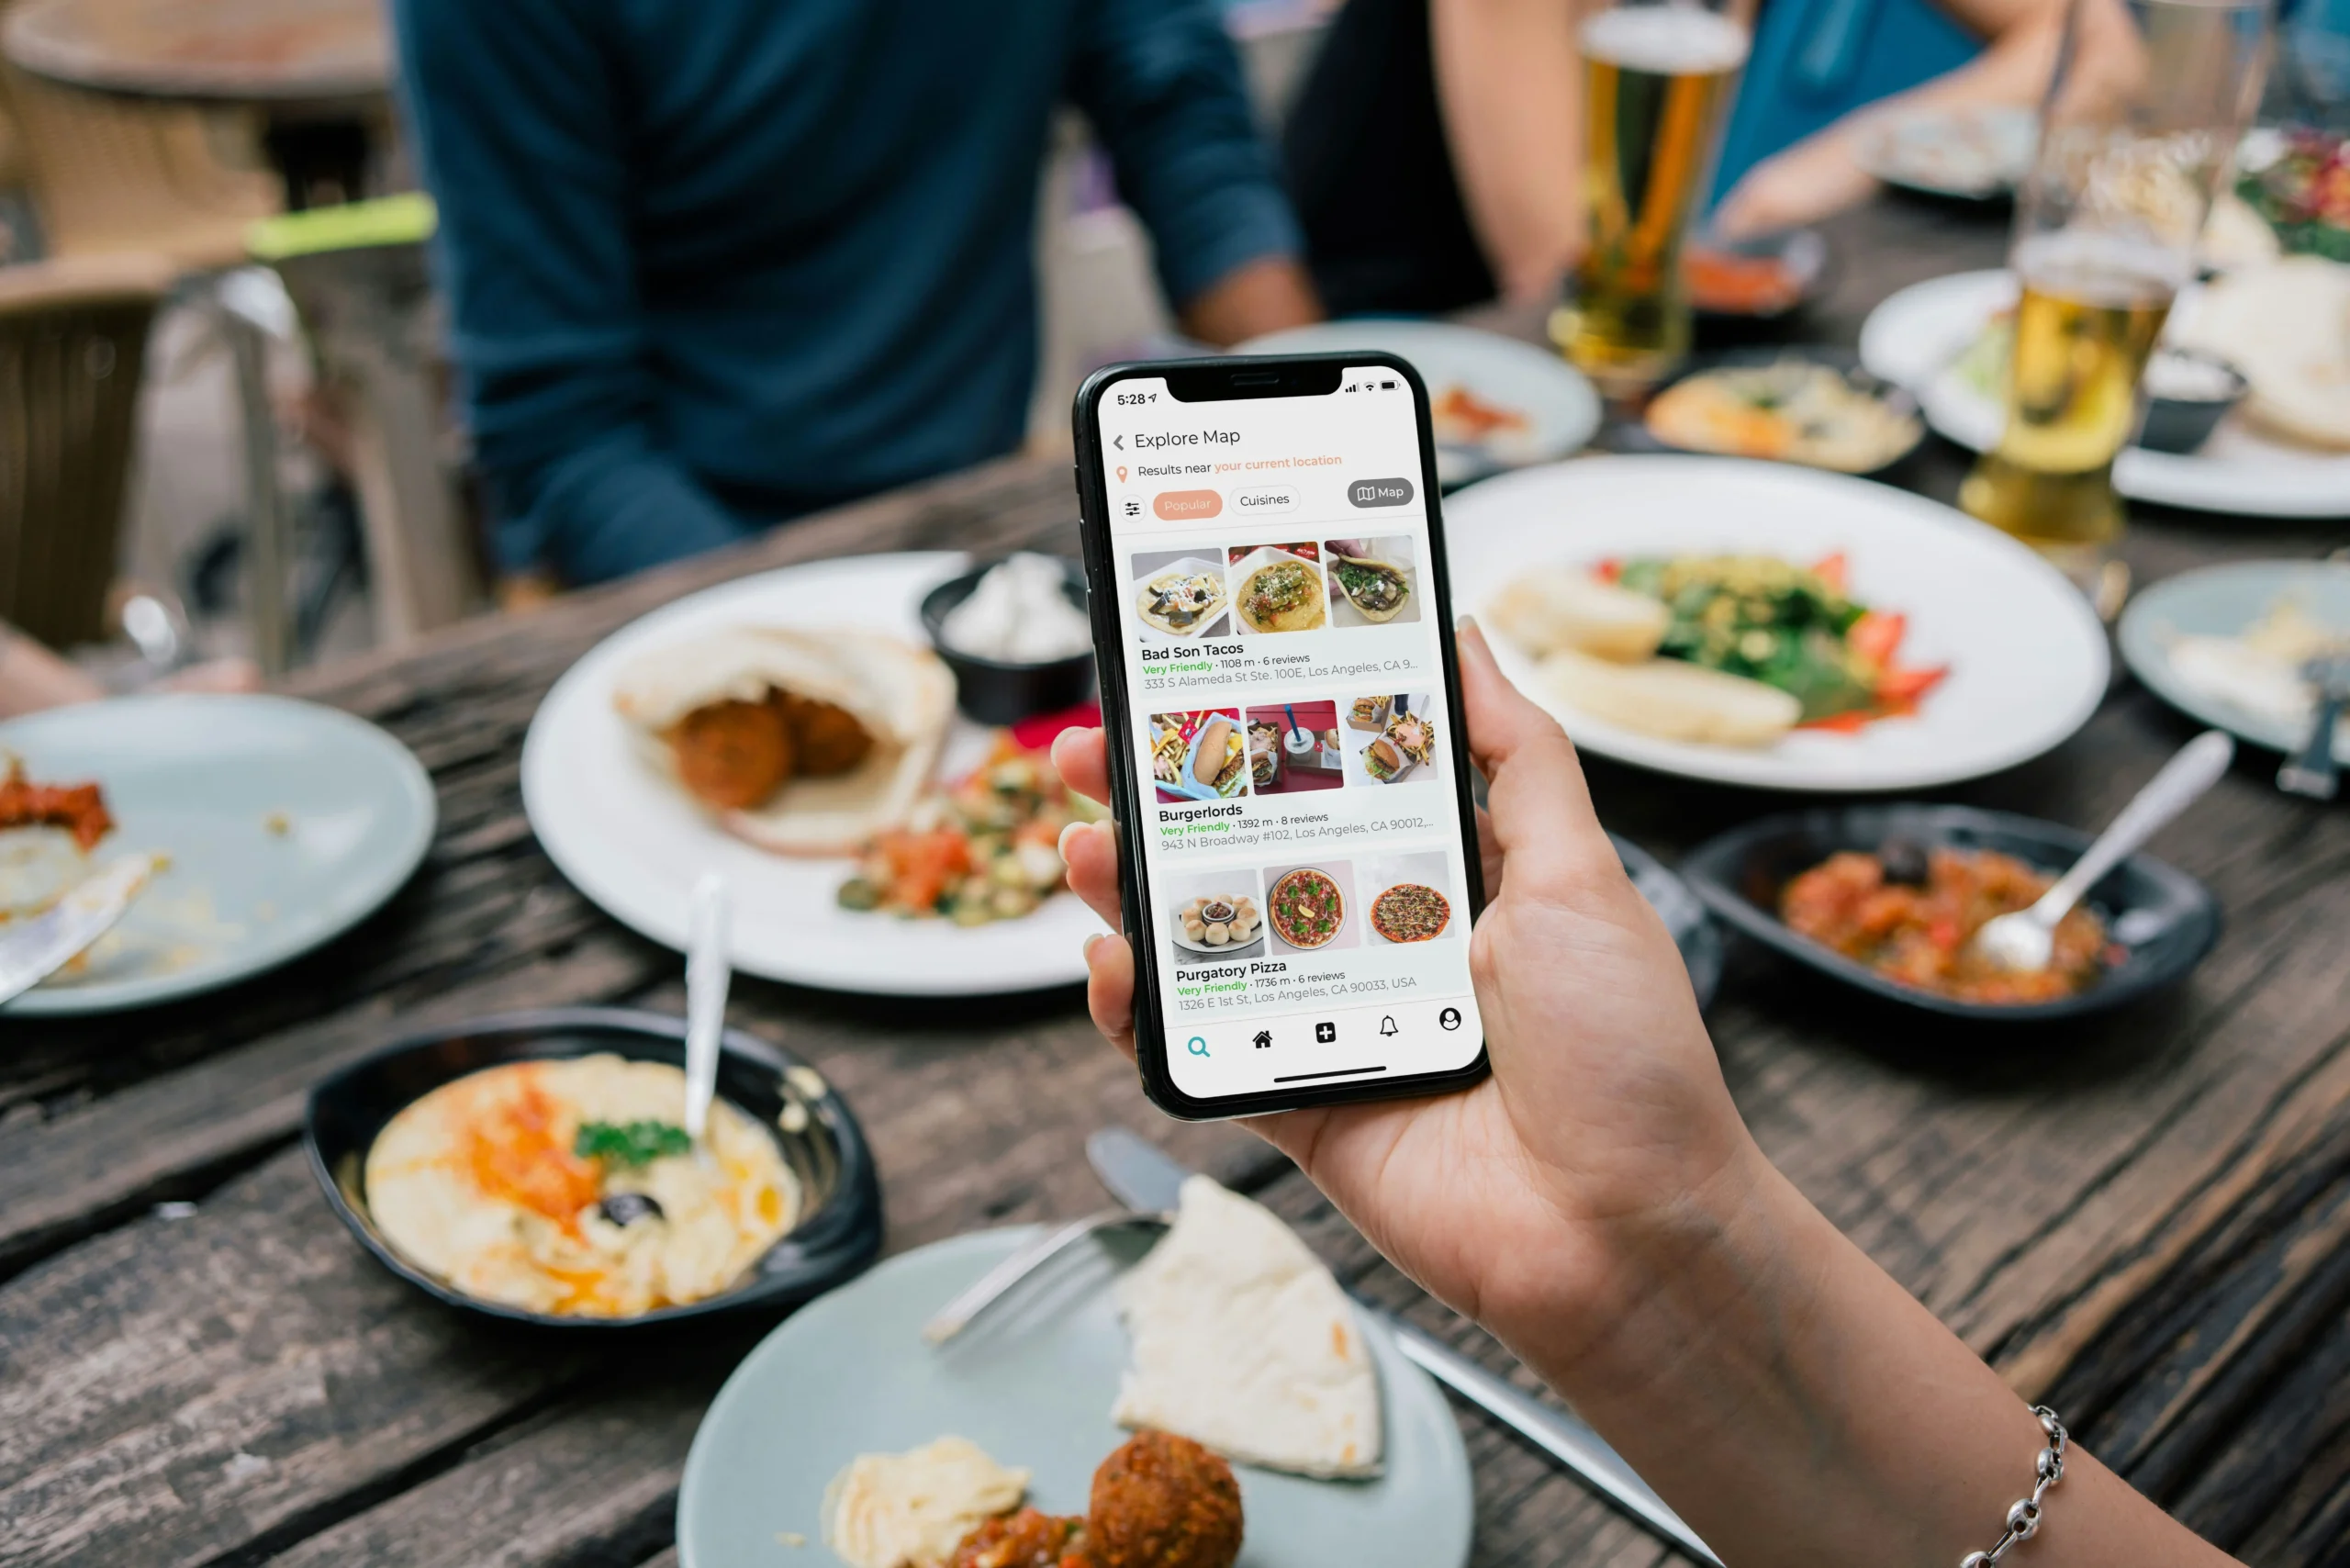 A person is using an app to find the best restaurant in the area. In the background, there is a table with food.